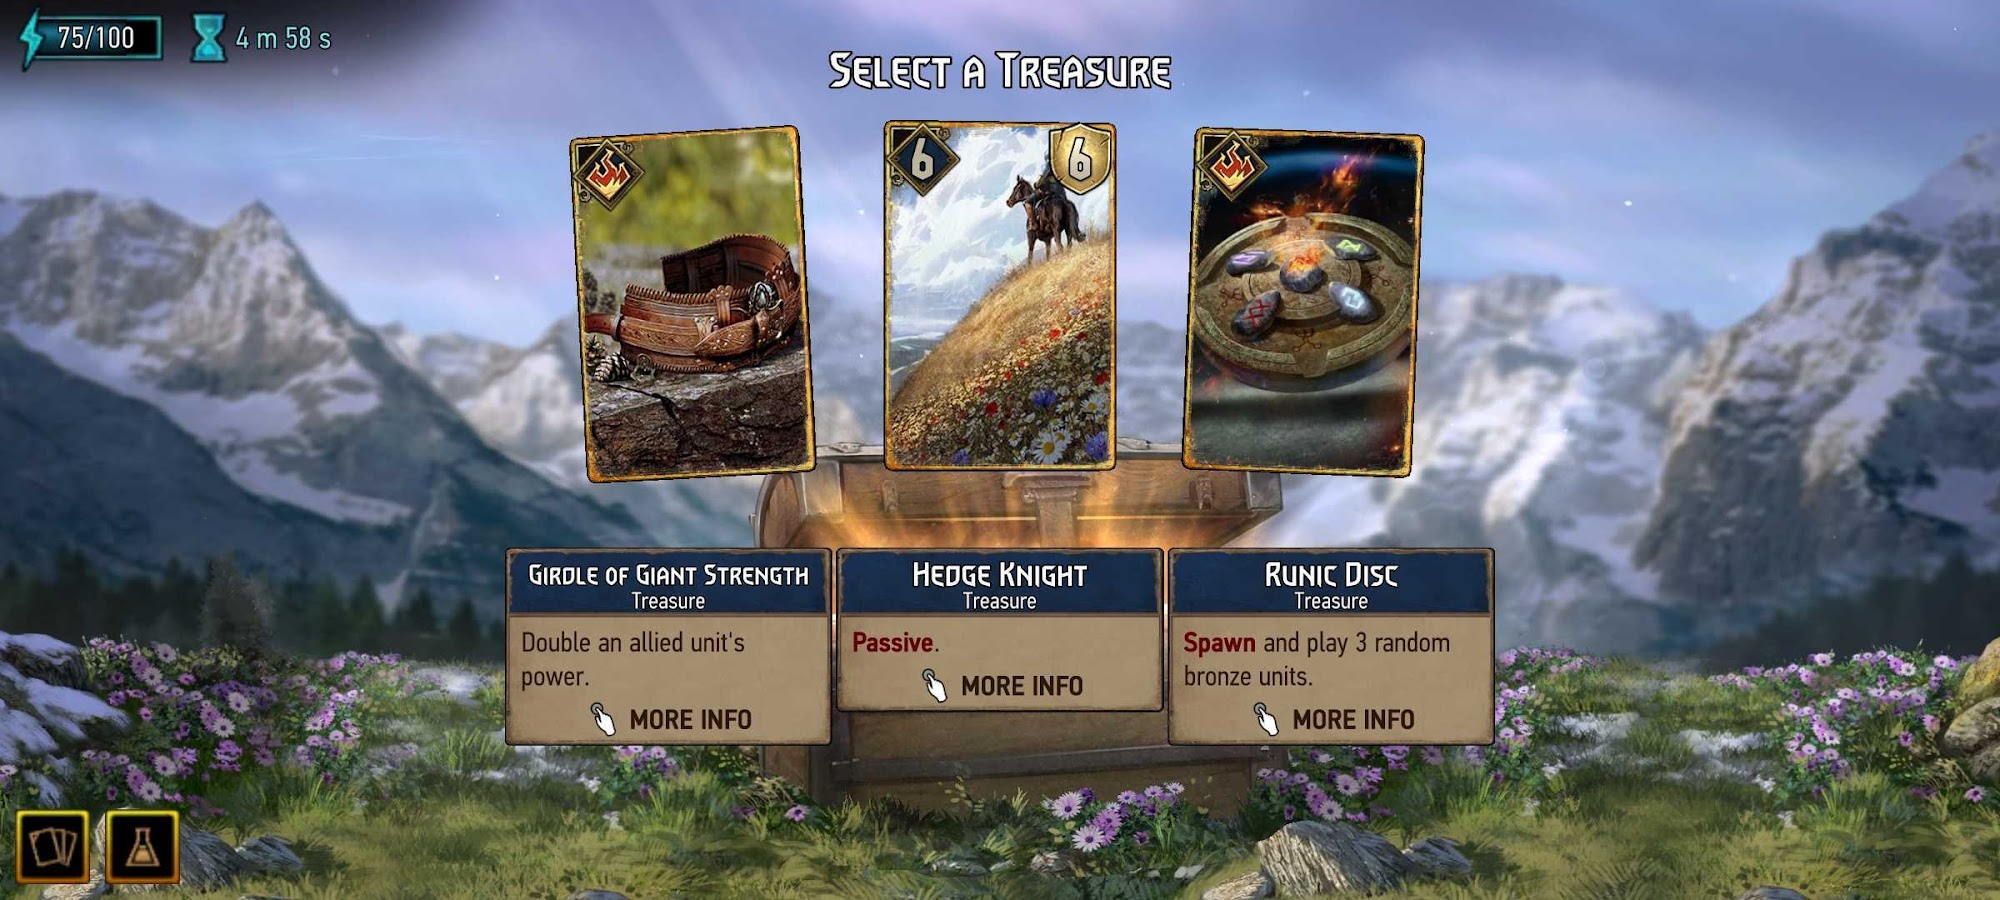 Full version of Android Fantasy game apk GWENT: Rogue Mage for tablet and phone.